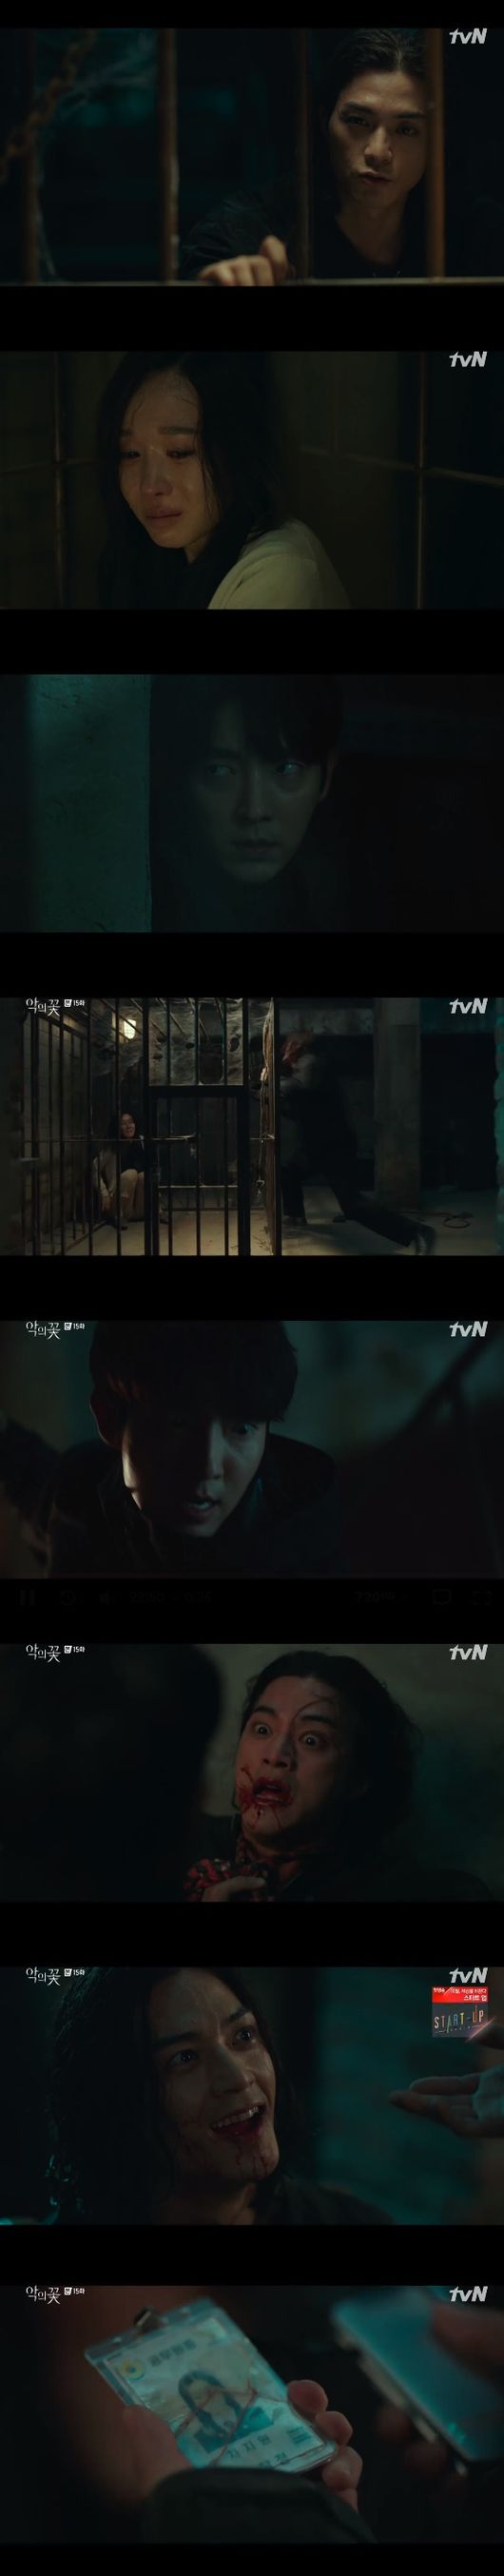 Lee Joon-gi was shot and knocked down by Kim Ji-hoon.In the TVN tree drama The Flower of Evil, which was broadcast on the 17th, Do Hyun-soo (Lee Joon-gi) was shot and collapsed.On this day, Baek Hee-Seong (Kim Ji-hoon) visited Cha JiWons house and stabbed Do Hae-su (Jang Hee-jin) with a knife, thinking that Cha JiWon. At that time, Do Hyun-soo met Yeom Sang-chul (Kim Ki-du) and asked who was the accomplice, and Yeom Sang-chul said, If you betray me right now, I will not. I will be on your side. Kim Moo-jin (Seo Hyun-woo) visited Dohaesu and was surprised to see the fallen Dohaesu, bleeding, saying, If you do not come, it is not between you.On the other hand, Do Hyun-soo visited where Jung Mi-sook (Han Soo-yeon) was trapped and told Jung Mi-sook, The accomplice in the murder case is targeting you.And Im going to get him, he said.There is only one thing, and unless you open this door yourself, no one can open it. Jung Mi-sook is safe, he said.However, Jung Mi-sook did not believe in Do Hyun-soo, who was trying to help him. Do Hyun-soo said, I think he wants to help me because he is in a similar situation to Jung Mi-sook.I do not know why I should be doing this. I am in the situation now. Jung Mi-sook finally grabbed the key.Choi Jae-seop (Choi Young-joon) said, The time of death is a little strange while investigating the behavior of Park Soon-young, a housekeeper (Nam Ki-ae).In response, Arata Iura Chul (Choi Dae-hoon) said, The rigid time may change at any rate; I need to meet a delivery person myself; the investigation is poor.Cha JiWon (Moon Chae-won) found the black box of the criminal who called Do Hyun-soo, and Detectives said, I think I called you from a place without CCTV. Why did not I think of the black box?I would have known it, he questioned.Cha JiWon was then told that the house was stolen and that the back was dangerous and headed straight home. Fortunately, the back was safe thanks to the sea.Detectives confirmed CCTV that the person who was looking for Cha JiWon was the one who called Do Hyun-soo.Lim Ho-joon (Kim Soo-oh) contacted Cha JiWon and said, Sir, you should not be alive today and spread to the media that Cha JiWon was dead.This article was smiled at by Baek Hee-seong, who said: He was trying to kill me, but he doesnt know my face.Its weird, said Arata Iurachul, who said if the killer is two people.Baek Hee-seong visited Yeom Sang-cheol and looked at Jung Mi-sook, who was trapped, and said, I did not remember that 15 years ago ... now I think you are remembering.Then he handed 500 million won to Yeom Sang-cheol, who counted the bills and tasted the money and inhaled the powerful rat poison sprayed by Baek Hee-seong.I do not know this fact, and he said, Lets not see it again.When Yeom Sang-cheol left, Baek Hee-seong told Jung Mi-sook, Do we always meet like this? No matter how much he escapes, he can not escape.This is your destiny, he said with an eerie smile.On the other hand, Choi Jae-seop, who was investigating Park Soon-young, said from the delivery man, He is not deaf.I did not knock the bell at that time, and confirmed that the tofu from Park Soon-young was at lunch, not dinner.Choi immediately informed his colleagues that he was trying to hide the criminal. Mom. I did not care because there was no black box 15 years ago.Baek Hee-seong woke up, he said, alarming.Do Hyun-soo was watching him behind the Baek Hee-seong and attacked him from behind when Do Hyun-soo tried to get out of Jung Mi-sook.Do Hyun-soo told Baek Hee-seong: Dont try too hard, you cant have any impact on me.Give me a phone that I contacted with Sang-cheol. Do Hyun-soo took out the phone and checked the bloody Cha JiWon nameplate.Baek Hee-seong said, I like the house. Whose boat is behind the TV? I like it.I did not touch the child, he said, and Do Hyun-soo called Cha JiWon in tears, but Cha JiWon did not answer the phone because he did not know the number.The police officer inquired and said the victim was killed at DJ Maphorisa Police Station.I am going to win unconditionally, said Baek Hee-seong, who saw this.Even if you hand me over to the police station... even if I die for you... you can never win. So, Do Hyun-soo approached Baek Hee-seong with a knife and said, I will kill you and kill you. However, Baek Hee-seong ran away after walking Do Hyun-soo.Do Hyun-soo followed the fleeing Baek Hee-seong and stabbed his thigh and arm, and Baek Hee-seong led his injured body to the cliff, and Do Hyun-soo pointed the knife after overpowering Baek Hee-seong.At that time, Cha JiWon heard that a phone call came from DJ Maphorisa Police Station wondering about his death, and Cha JiWon, who confirmed that Do Hyun-soo called, called straight away.Cha JiWons phone call was received by Jung Mi-sook and cried, Please get Do Hyun-soo. Jung Mi-sook came out of his own key given by Do Hyun-soo.Cha JiWon ran straight to the scene, Cha JiWon found Do Hyun-soo pointing a knife at Baek Hee-seong, and Baek Hee-seong looked at Cha JiWon in front of him and said, Cha JiWon is right.I said you were dead. At that time, Do Hyun-soo was confused and confused again.Cha JiWon, who watched this, persuaded him, Its over, you only have to come this way. But Do Hyun-soo cried, I can not believe you.Then Cha JiWon shouted, You can hug me. Do Hyun-soo put down the knife and gave it to Cha JiWon.At that moment, Baek Hee-Seong shot at the two and fell down when Do Hyun-soo was shot in the head.broadcast screen capture